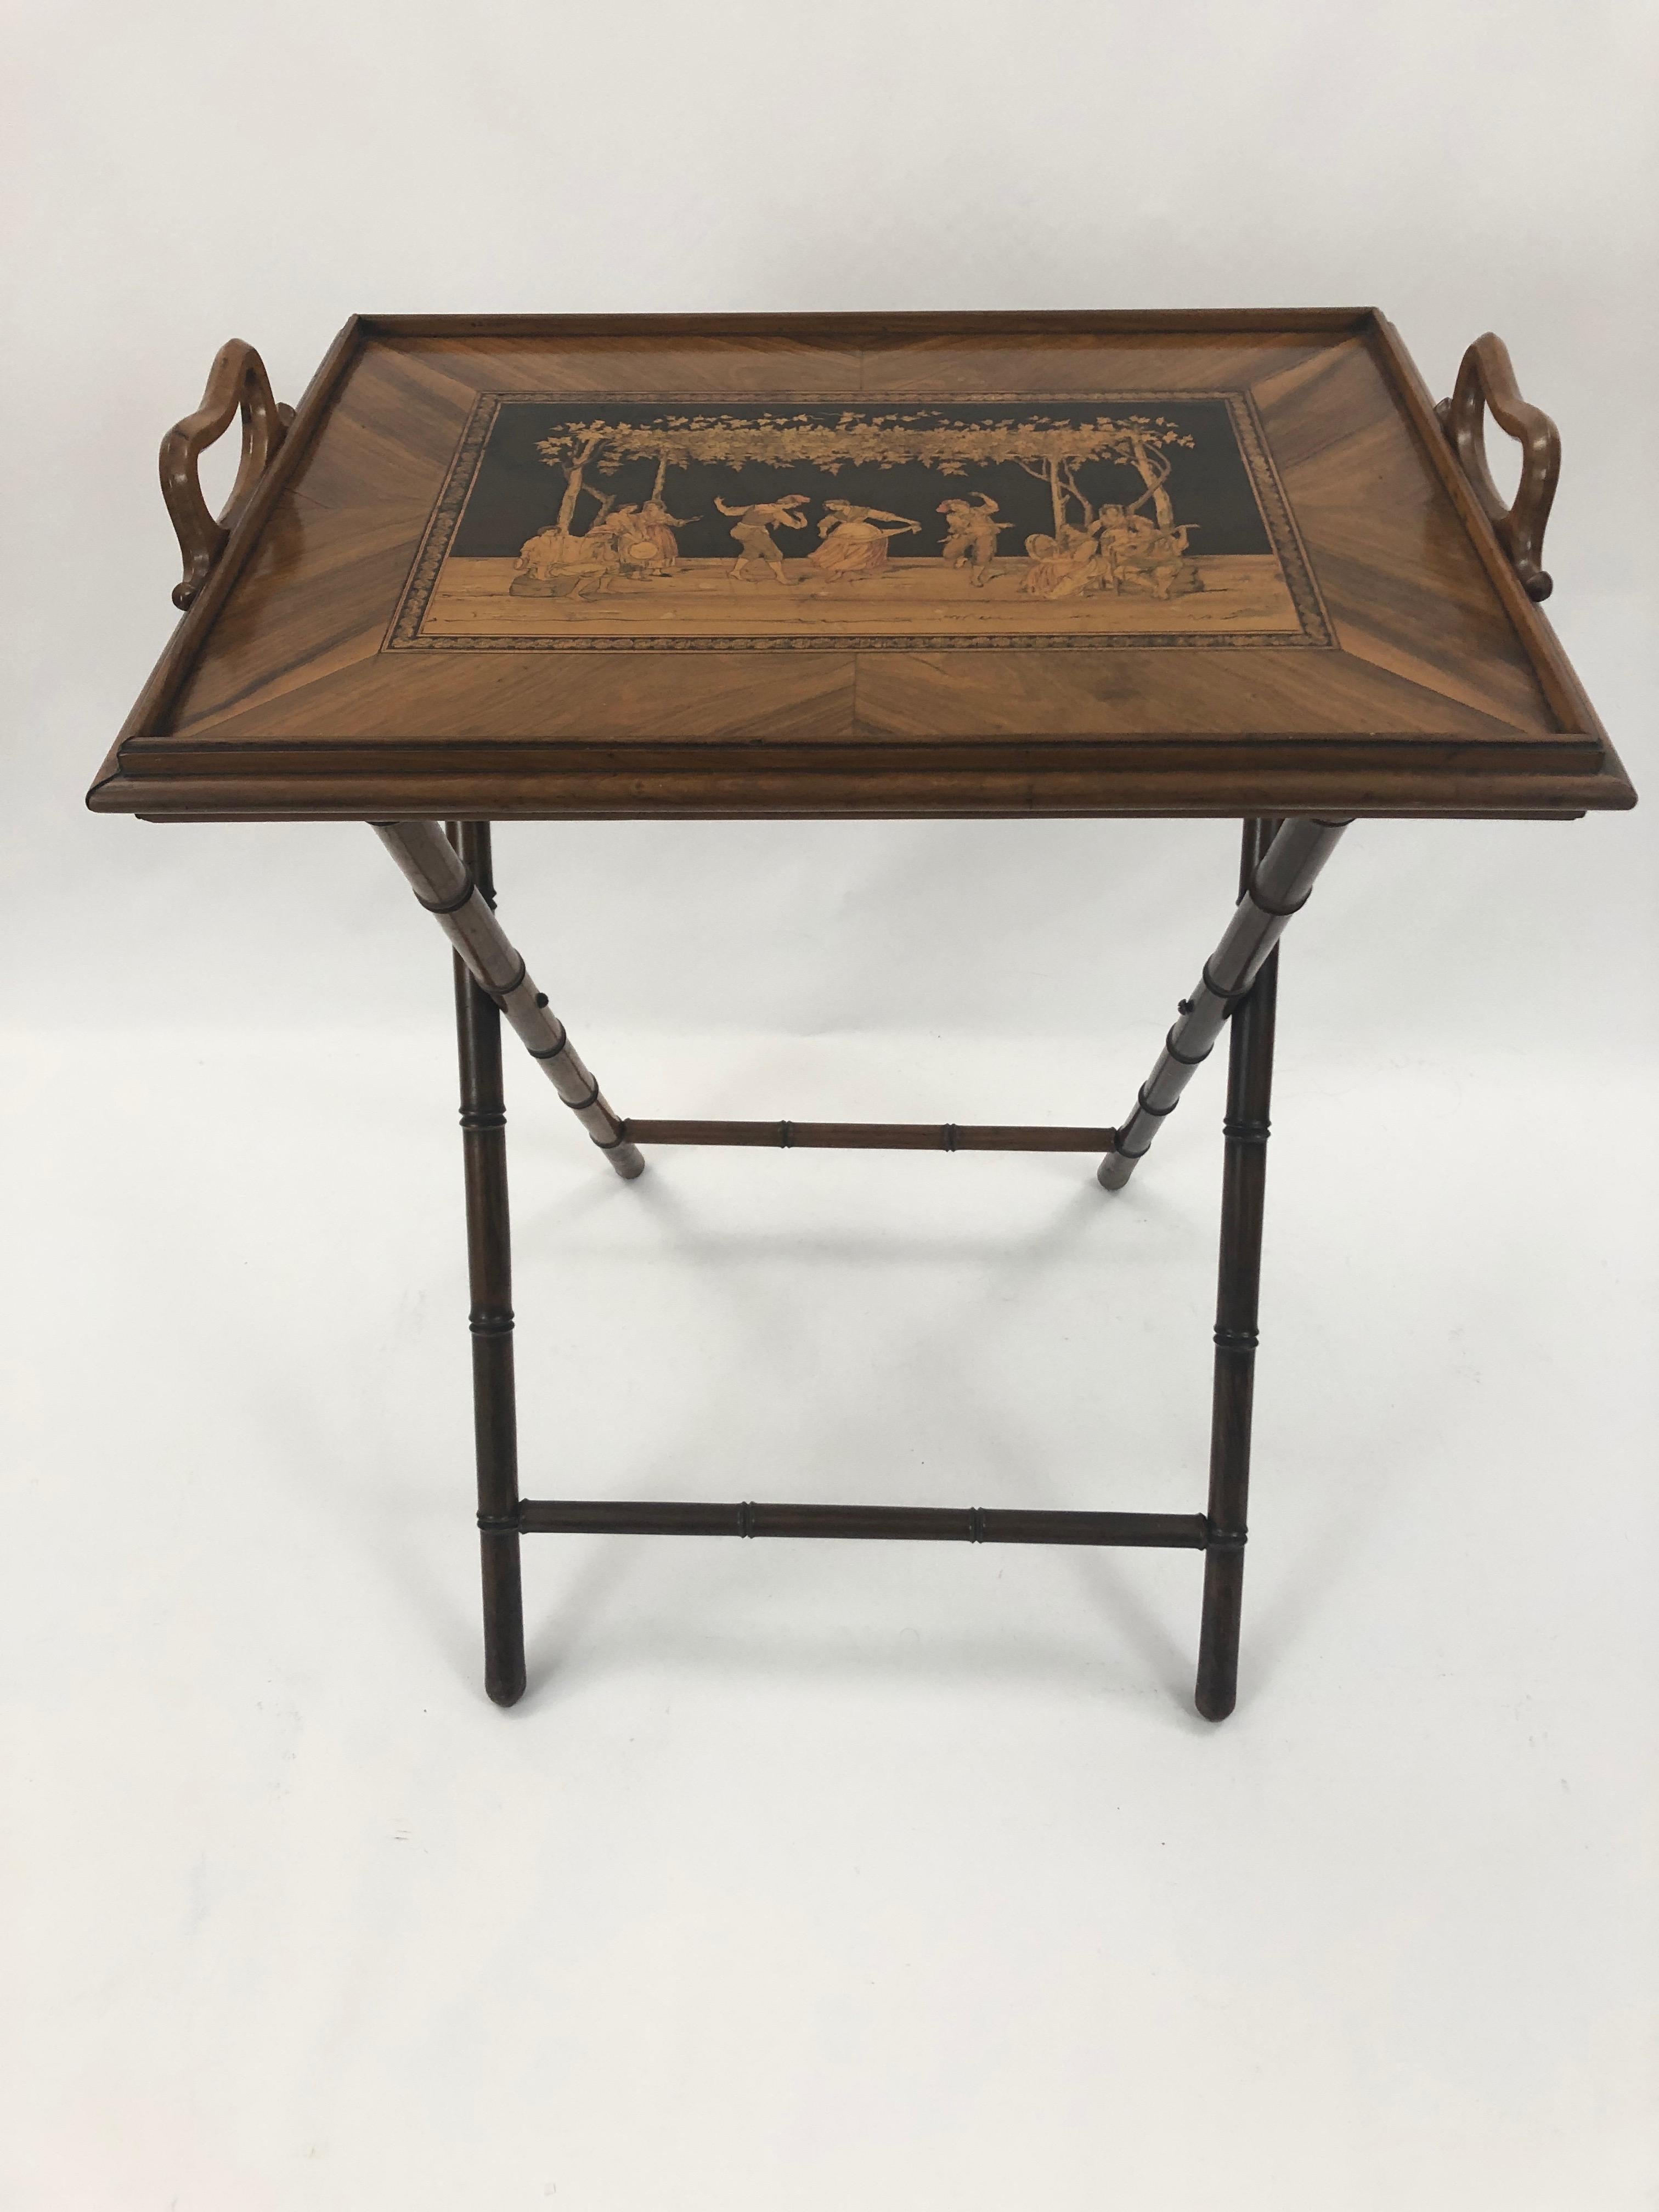 A splendid walnut inlaid tray table having a tray top on faux bamboo base with checkerboard on one side, and gorgeous intricate figural decoration on the other. The contrast of light and honey colored woods against a black background is especially